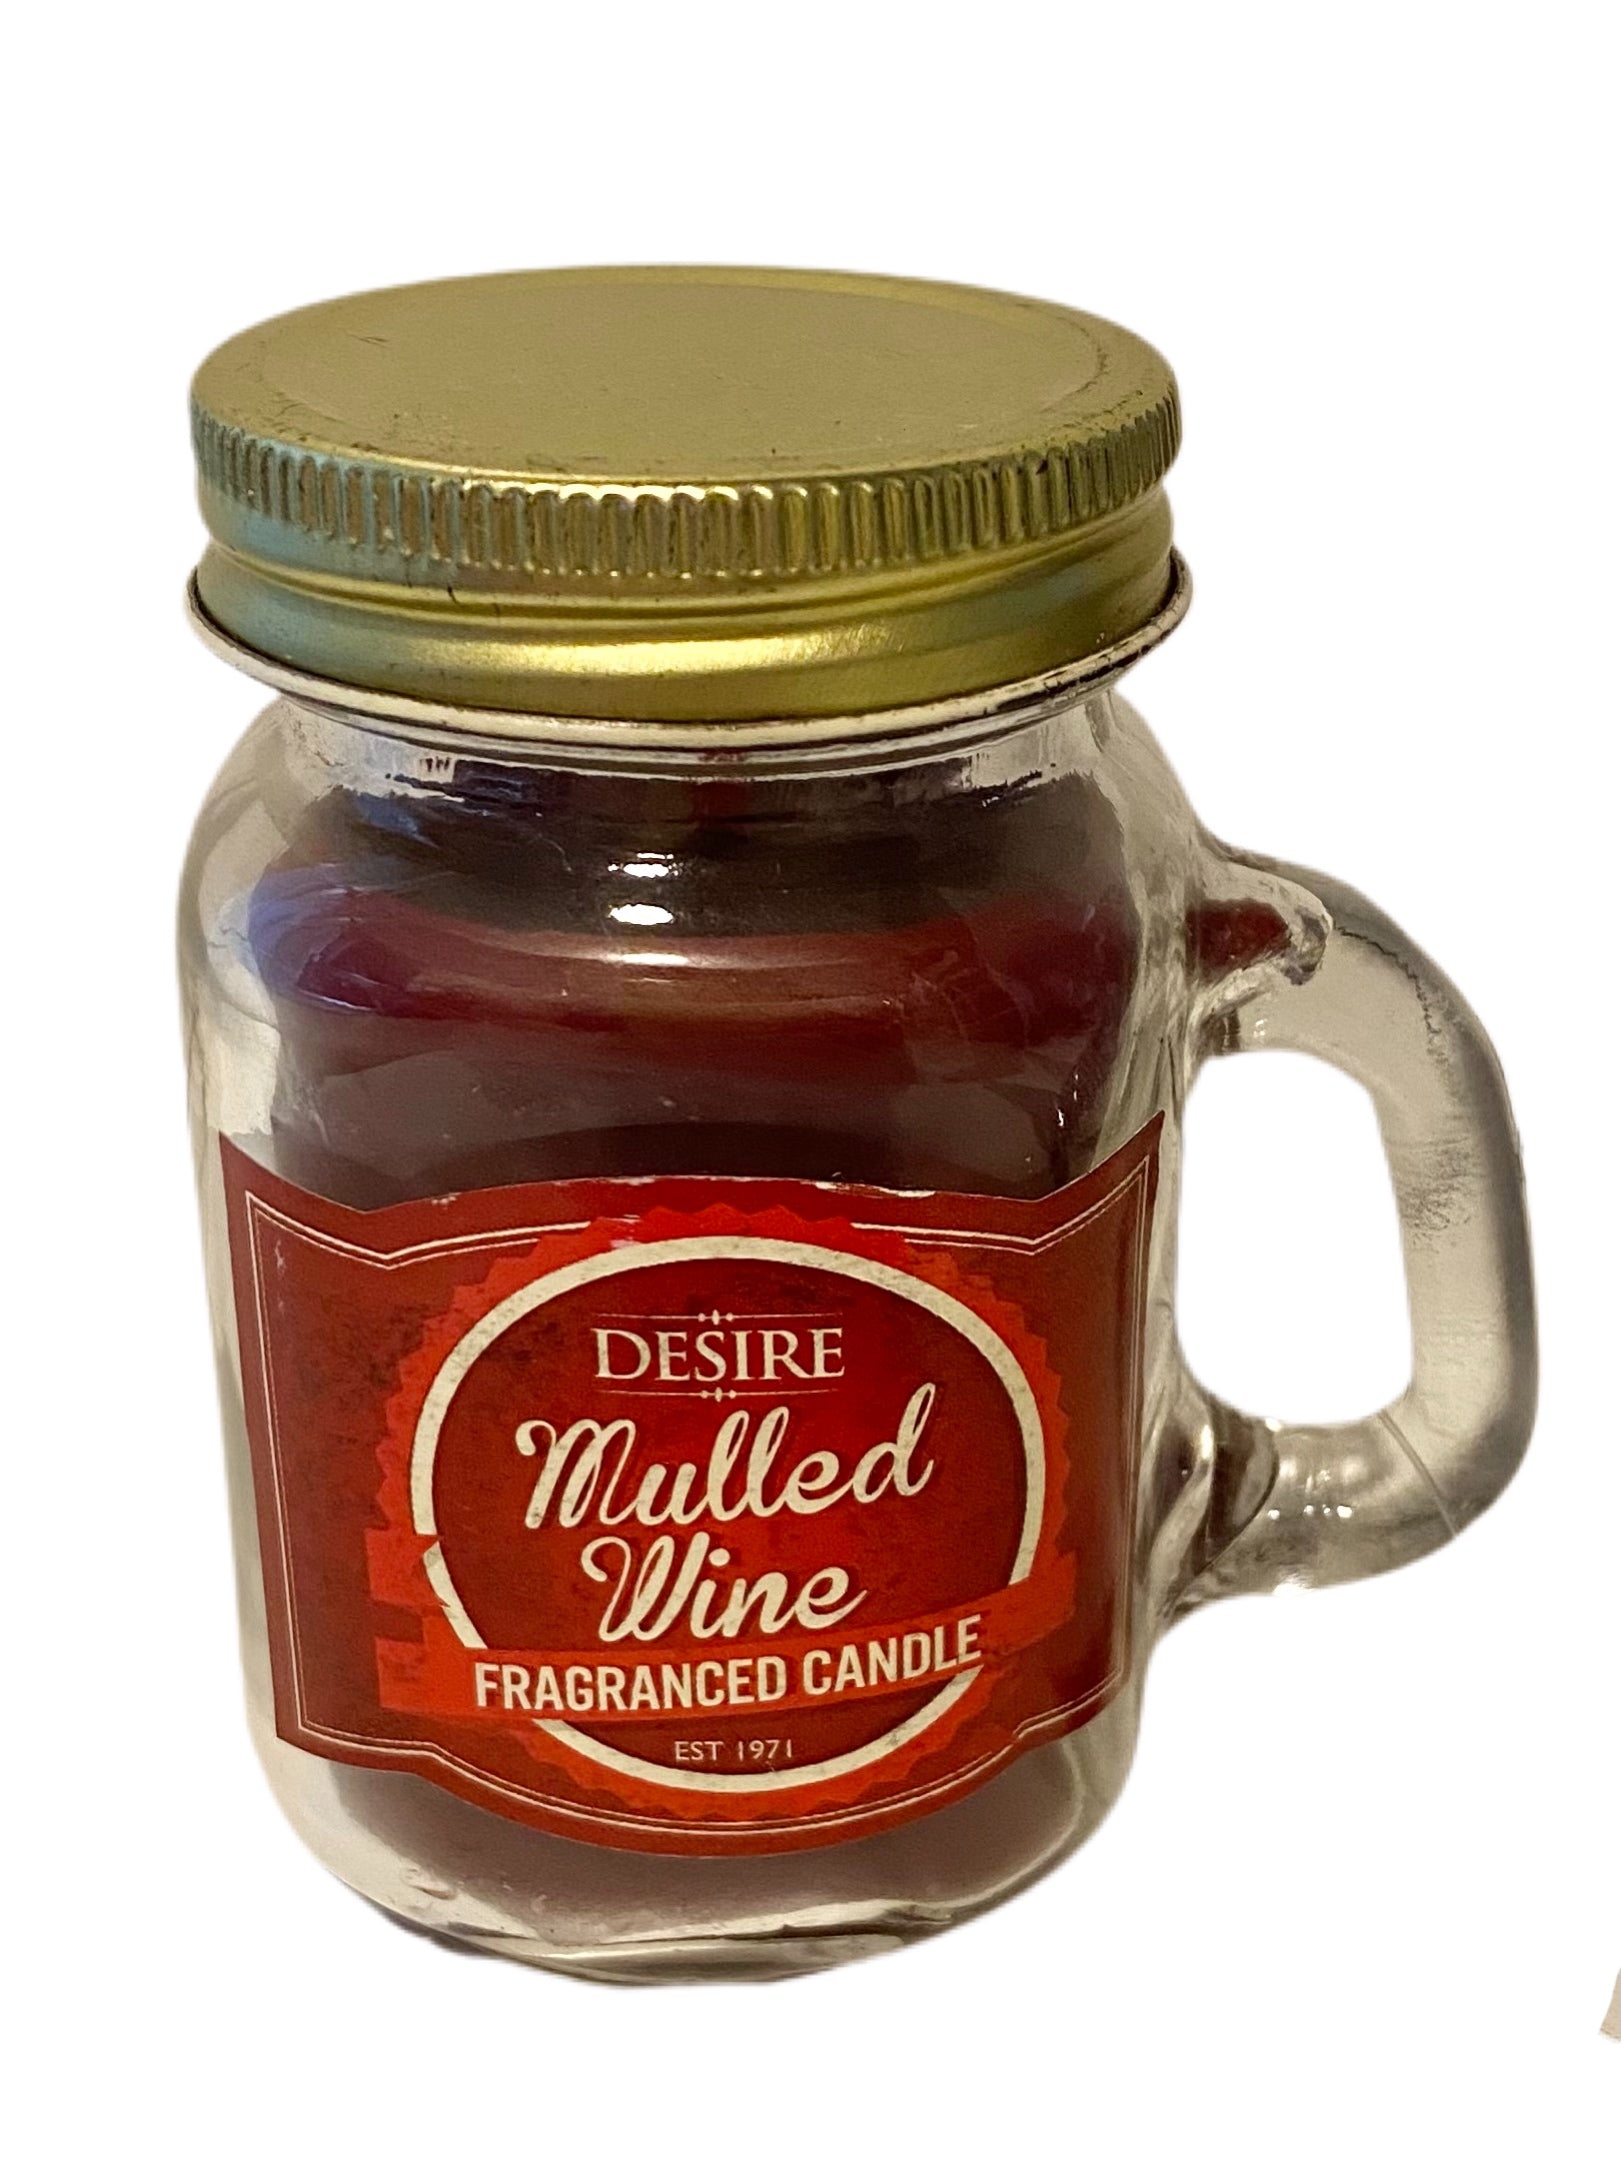 Desire Mulled Wine Fragranced Candle - Kate's Cupboard